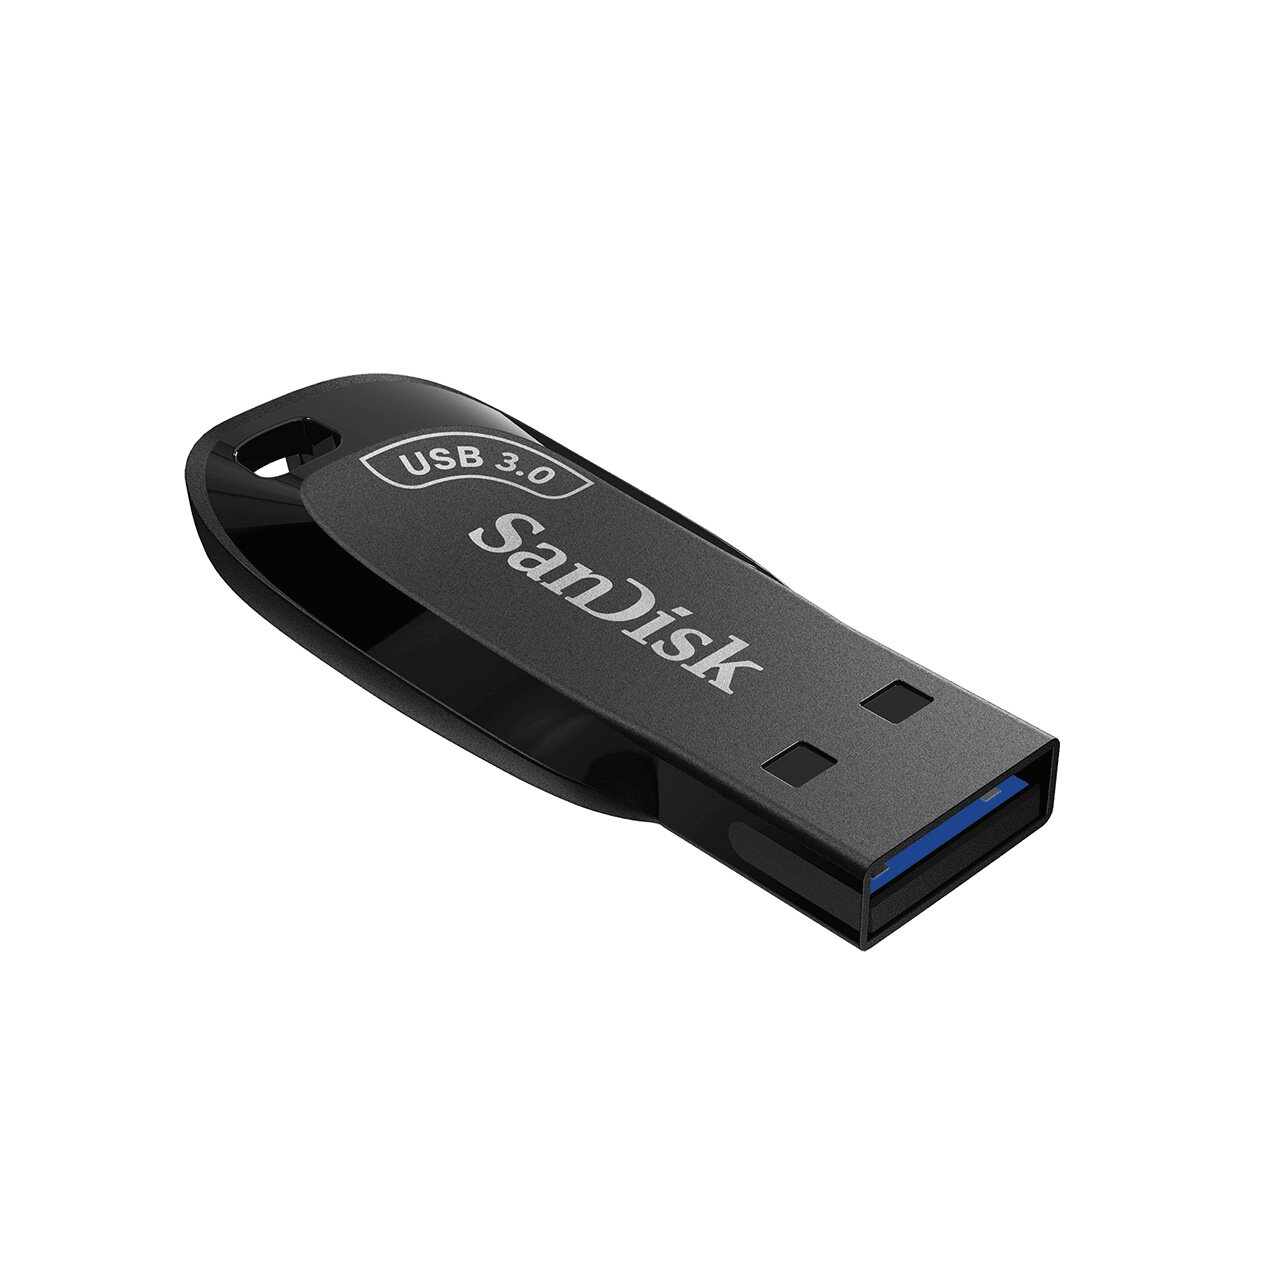 Sandisk Flash Drive Cruzer 410 (CZ410) Ultra Shift with USB 3.0 Connection, Cap-less Design, Sandisk Secure Access Software, Plug and Play